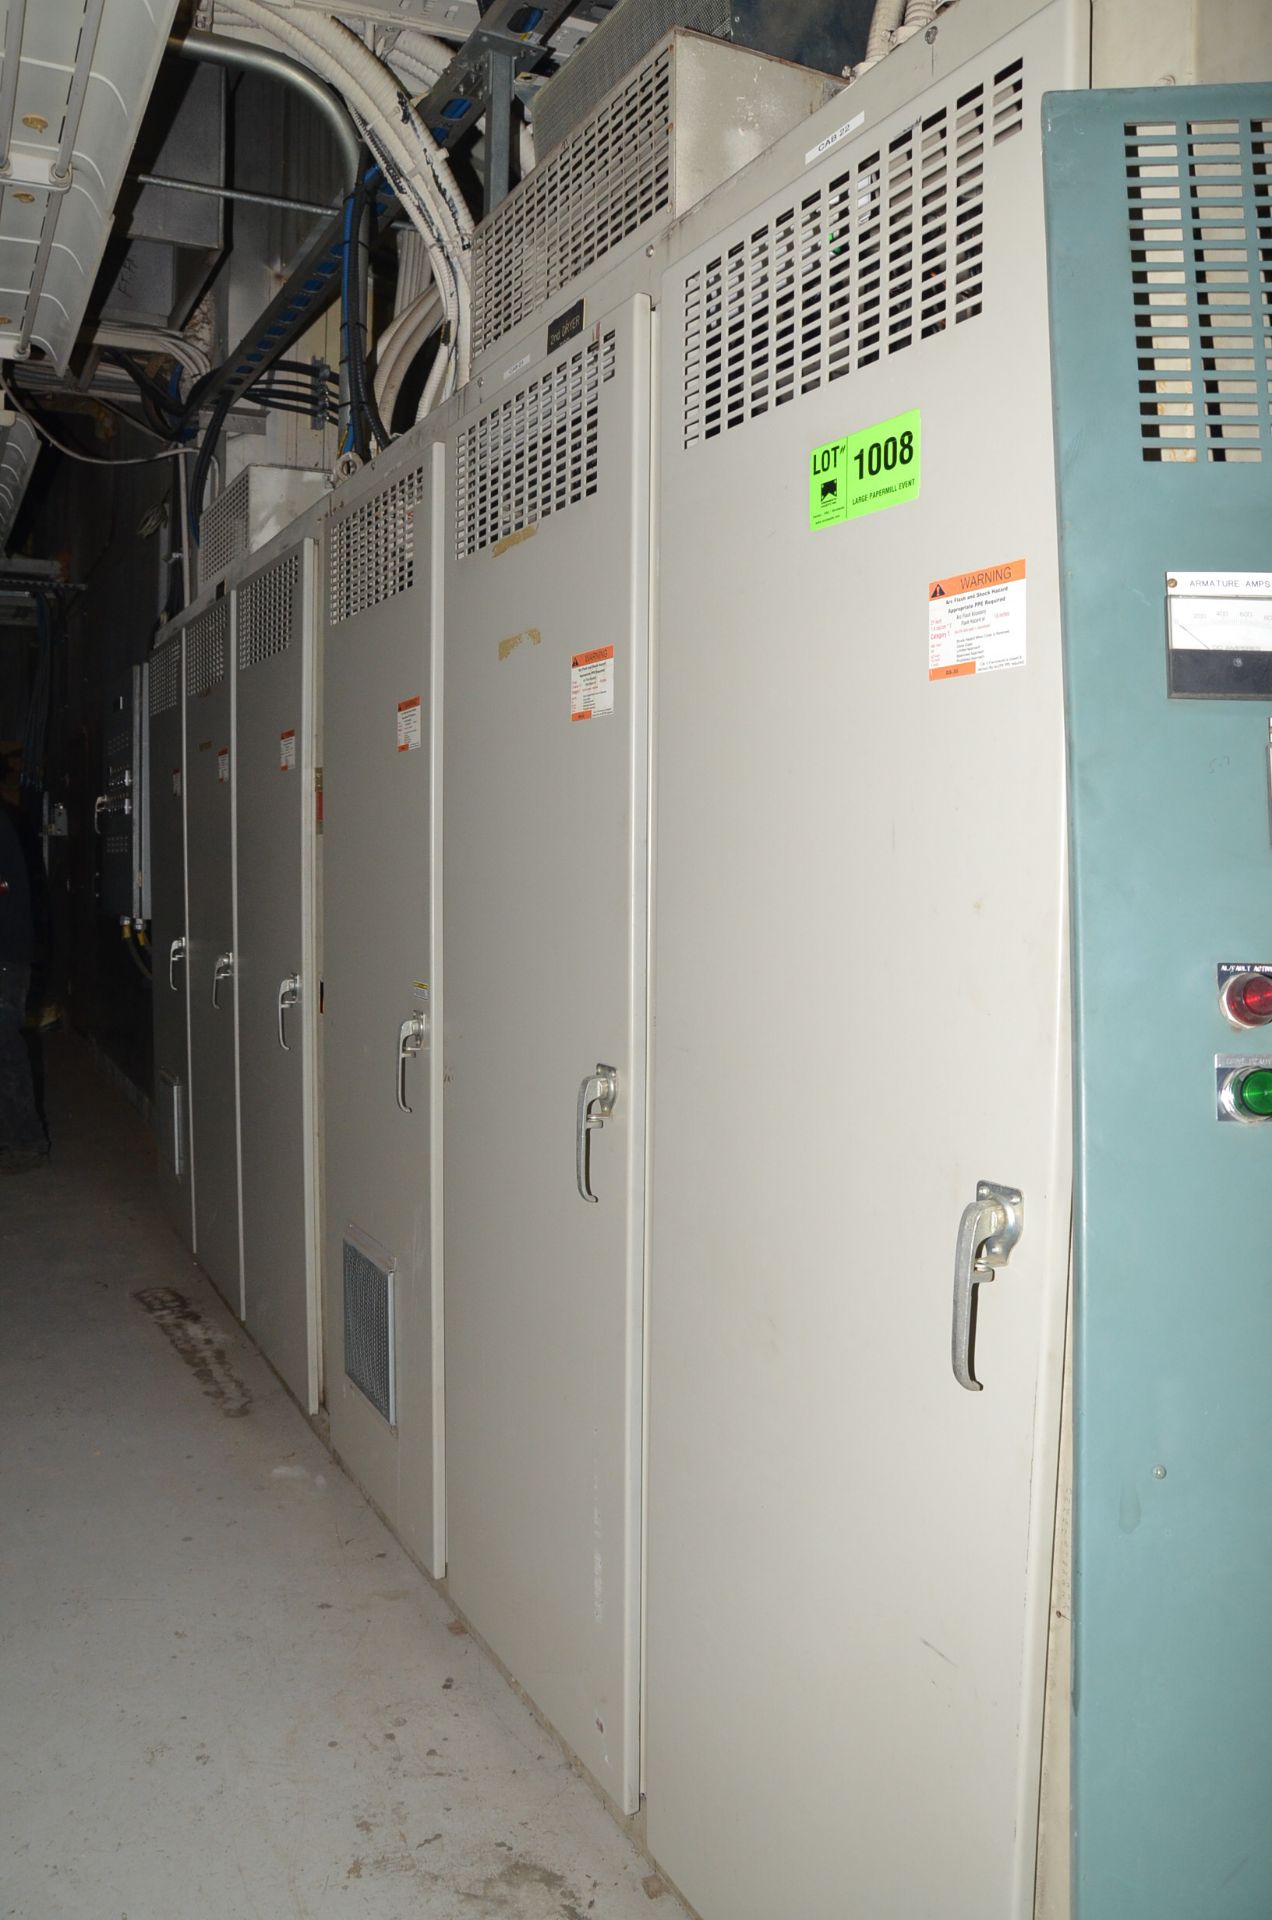 LOT/ PM5 DRIVE ROOM CABINETS CONSISTING OF 6-BANK CONTROL CABINETS WITH REMAINING COMPONENTS [